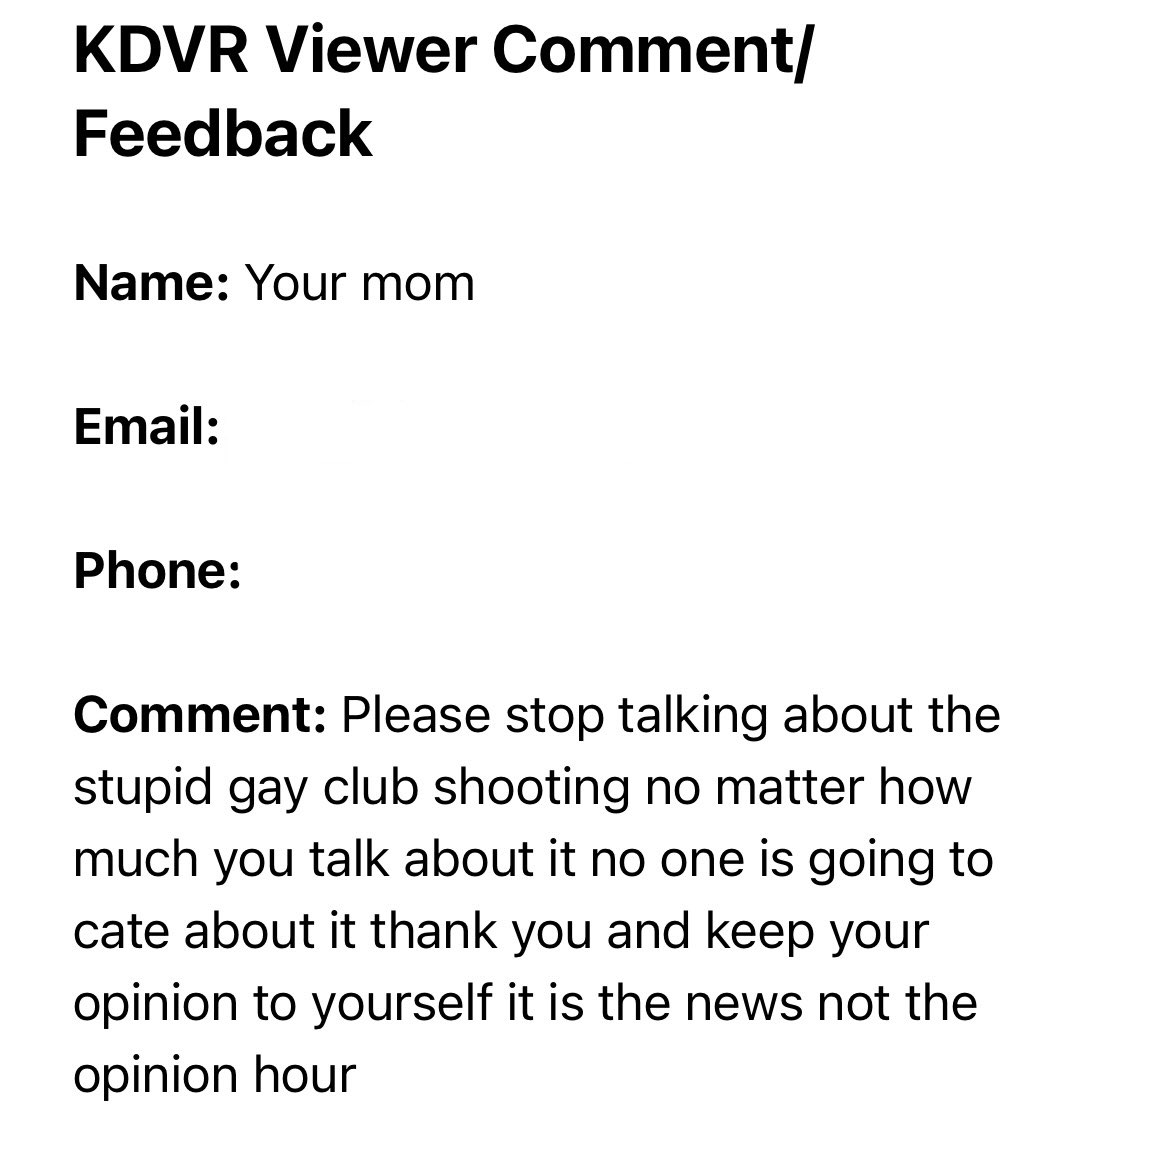 Unfortunately, I have covered mass shootings multiple times in my career. This is the first time I can recall getting message after message from viewers like this.